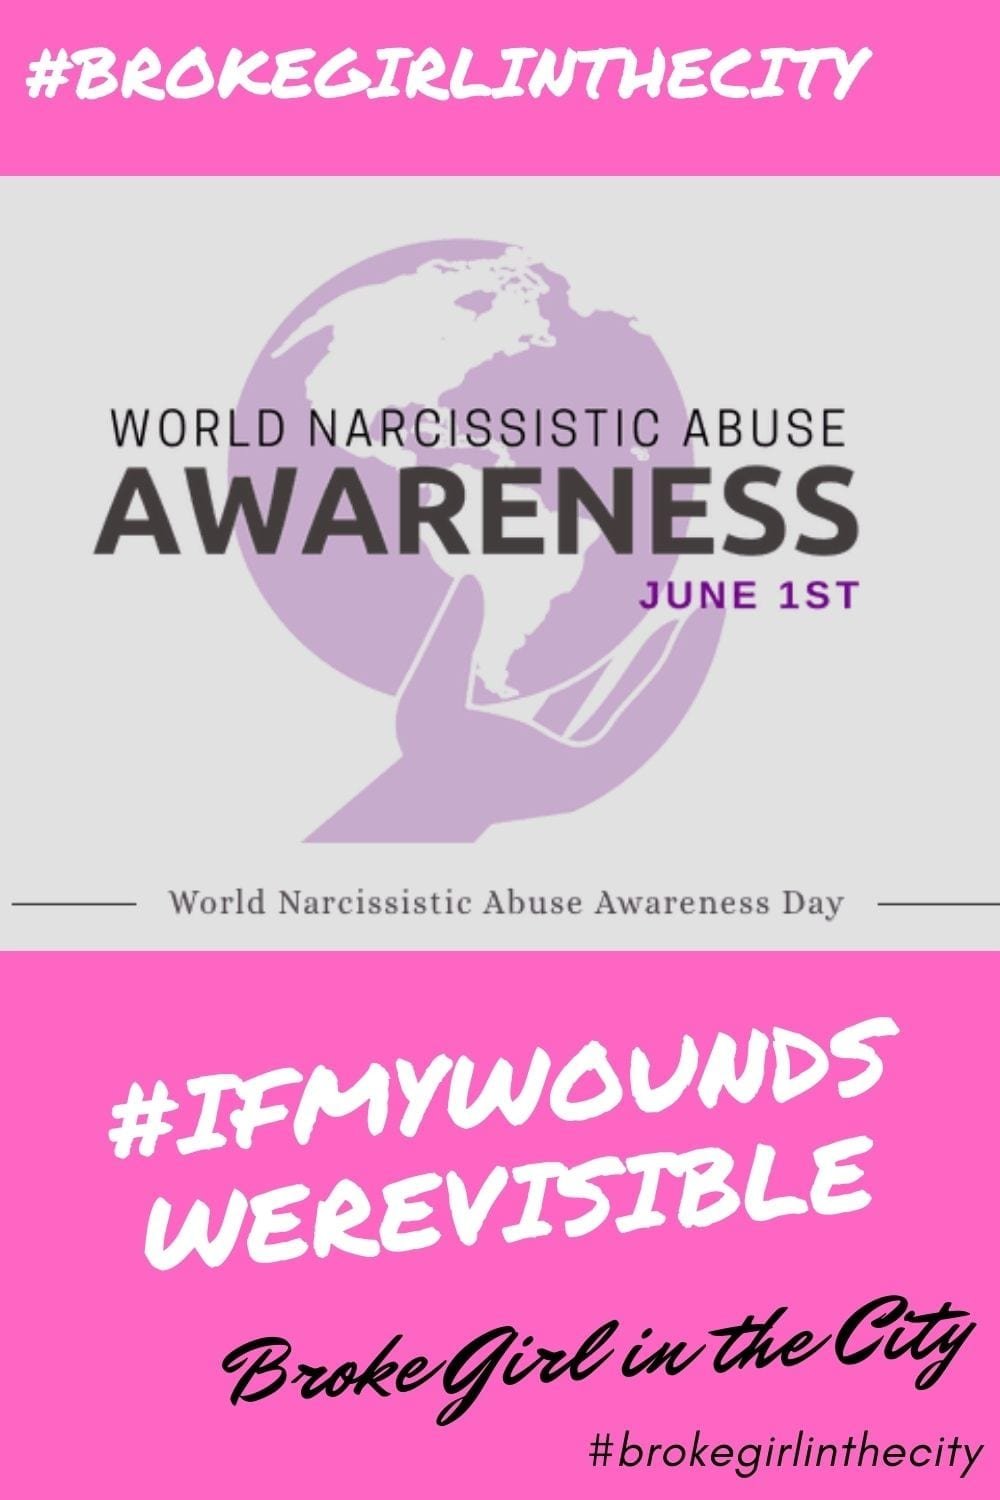 World-Narcisstic-Abuse-Awareness-Day